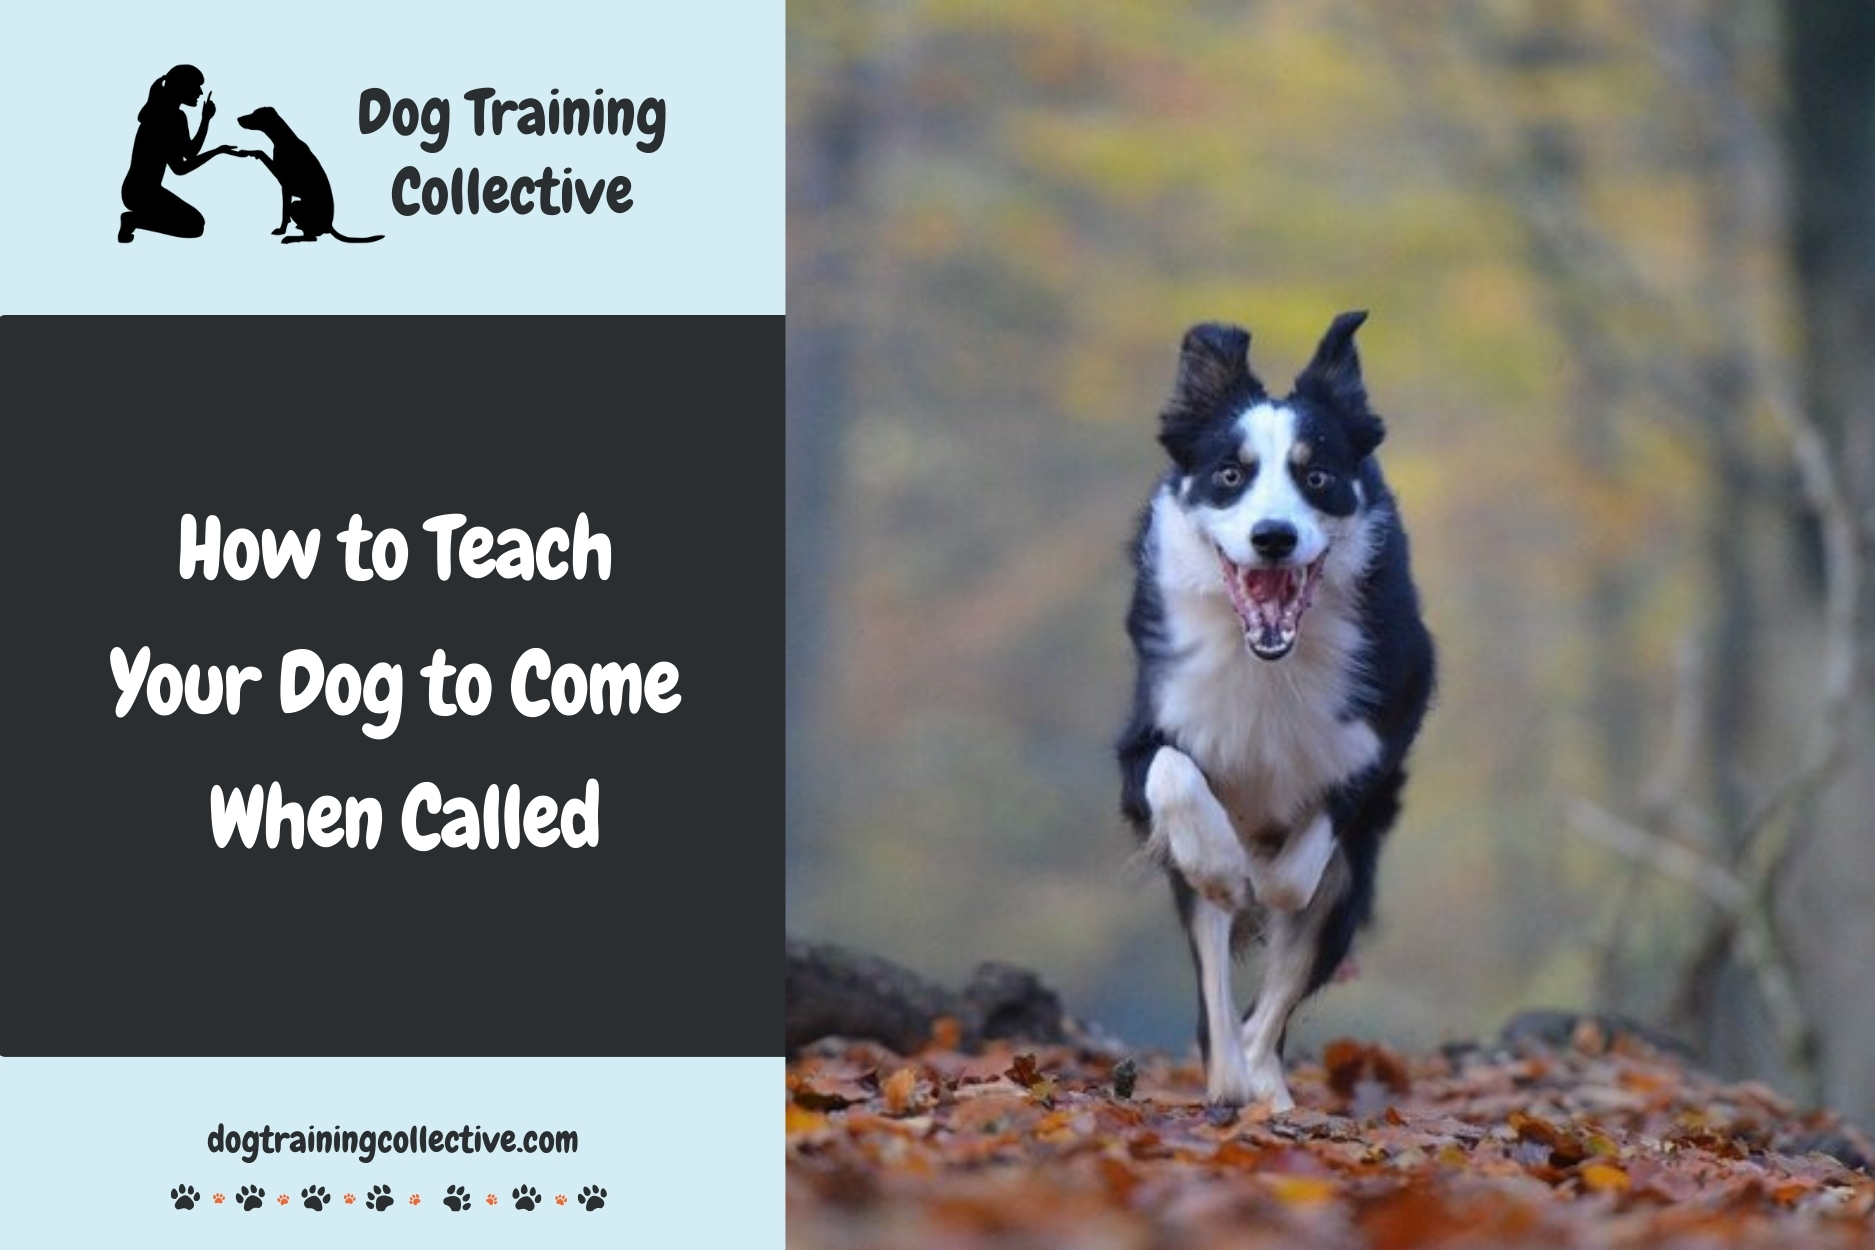 How to Teach Your Dog to Come When Called